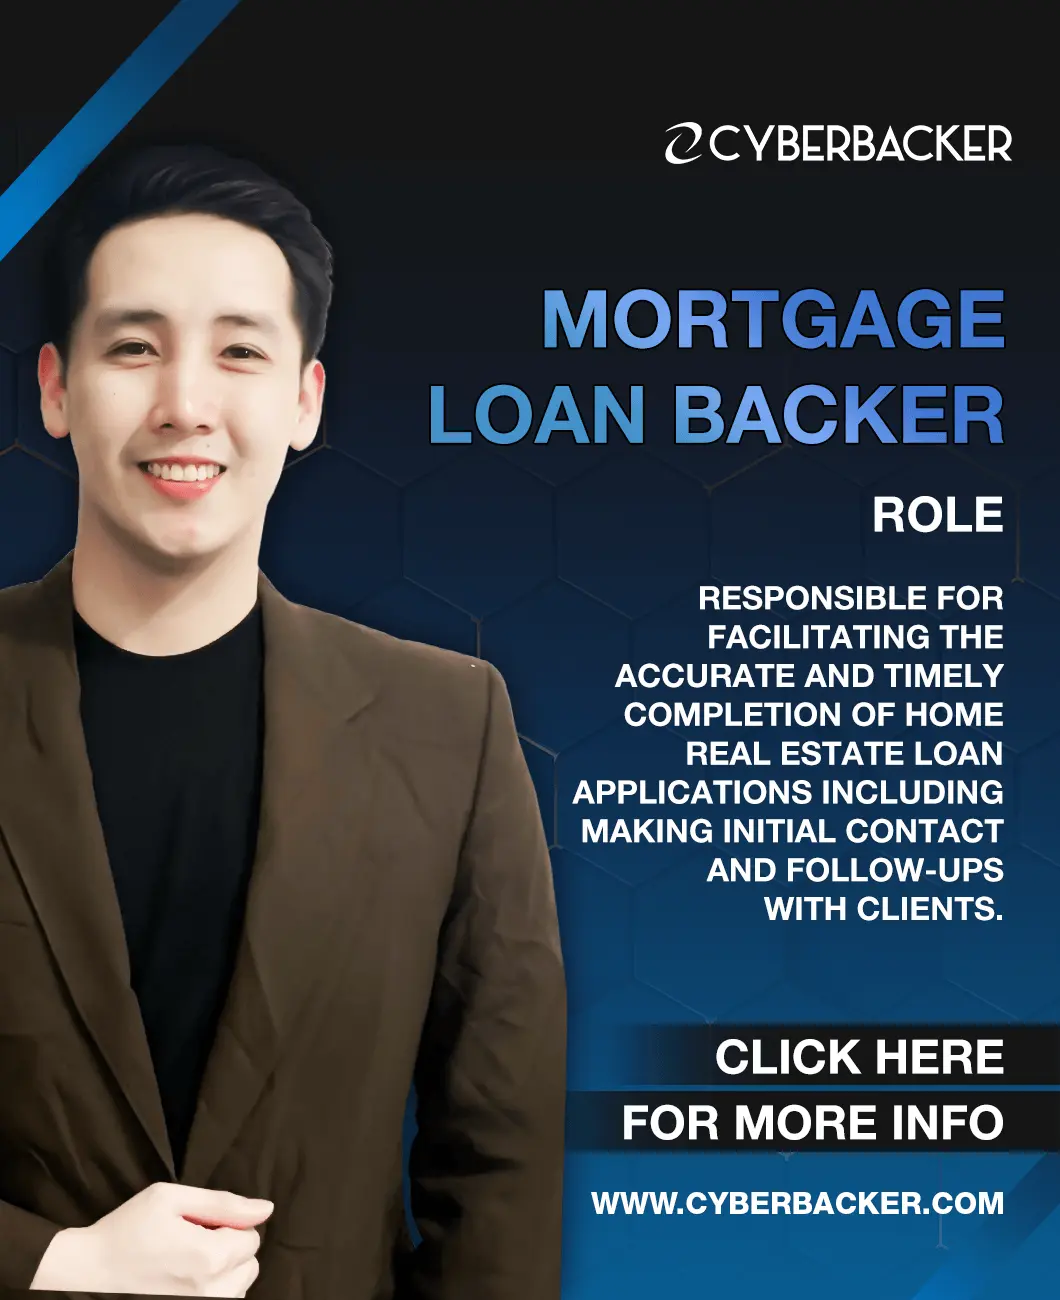 Cyberbacker Mortgage Loan Backer - Virtual Assistant Services in United States